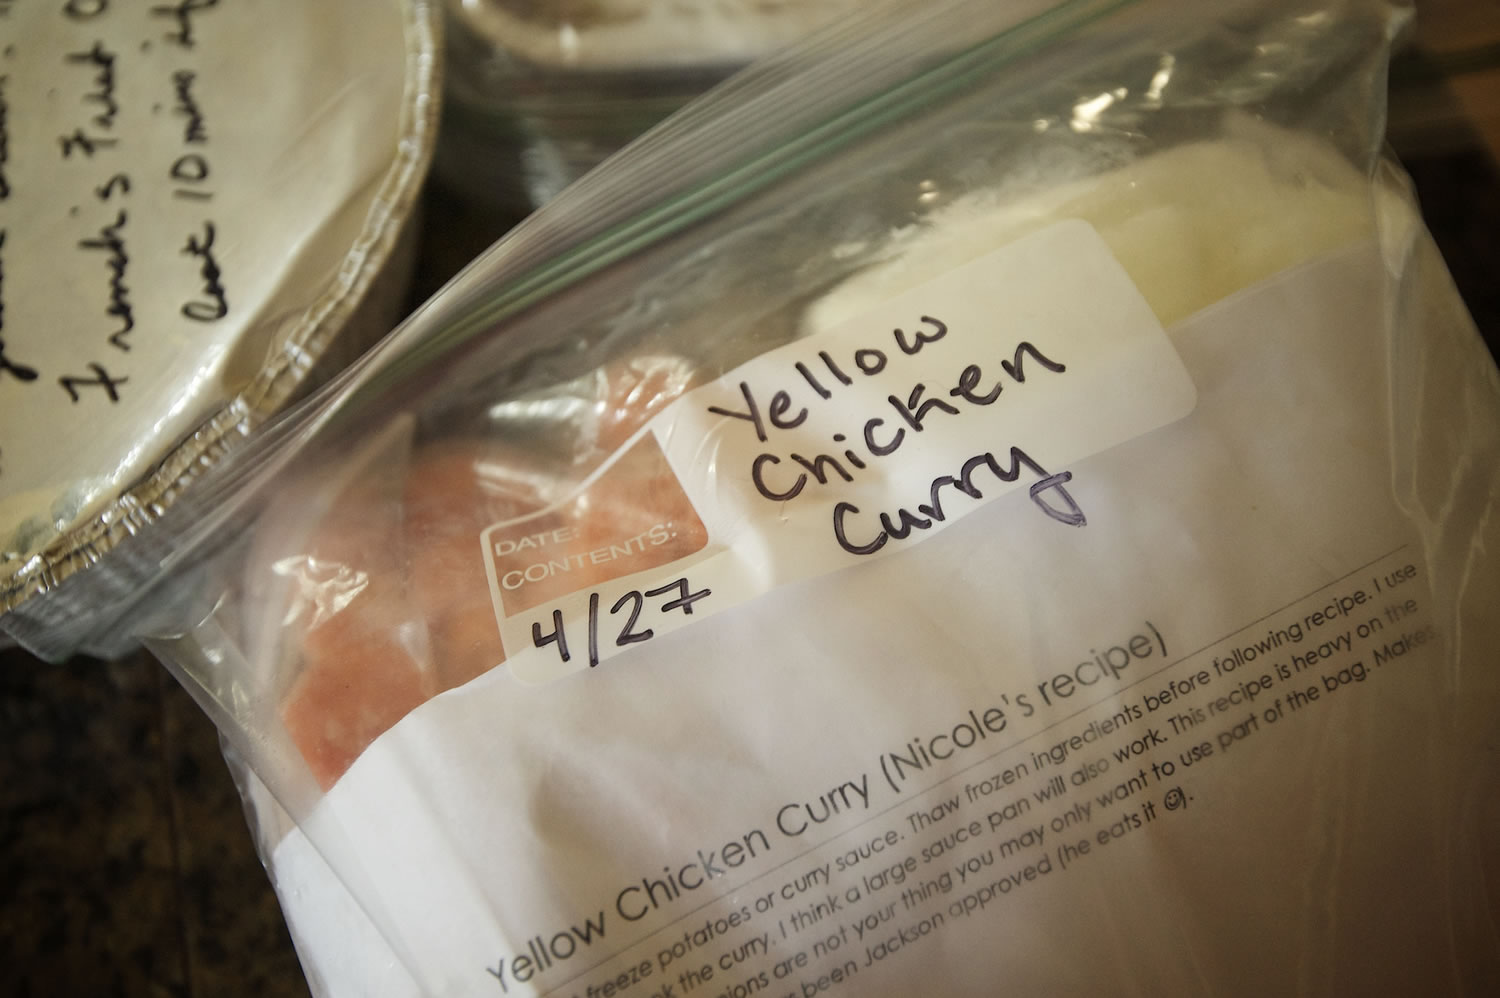 Yellow Chicken Curry is one of the seven frozen, homemade meals Julia Schetky has on hand, thanks to a meal swap she organized in Vancouver last month.